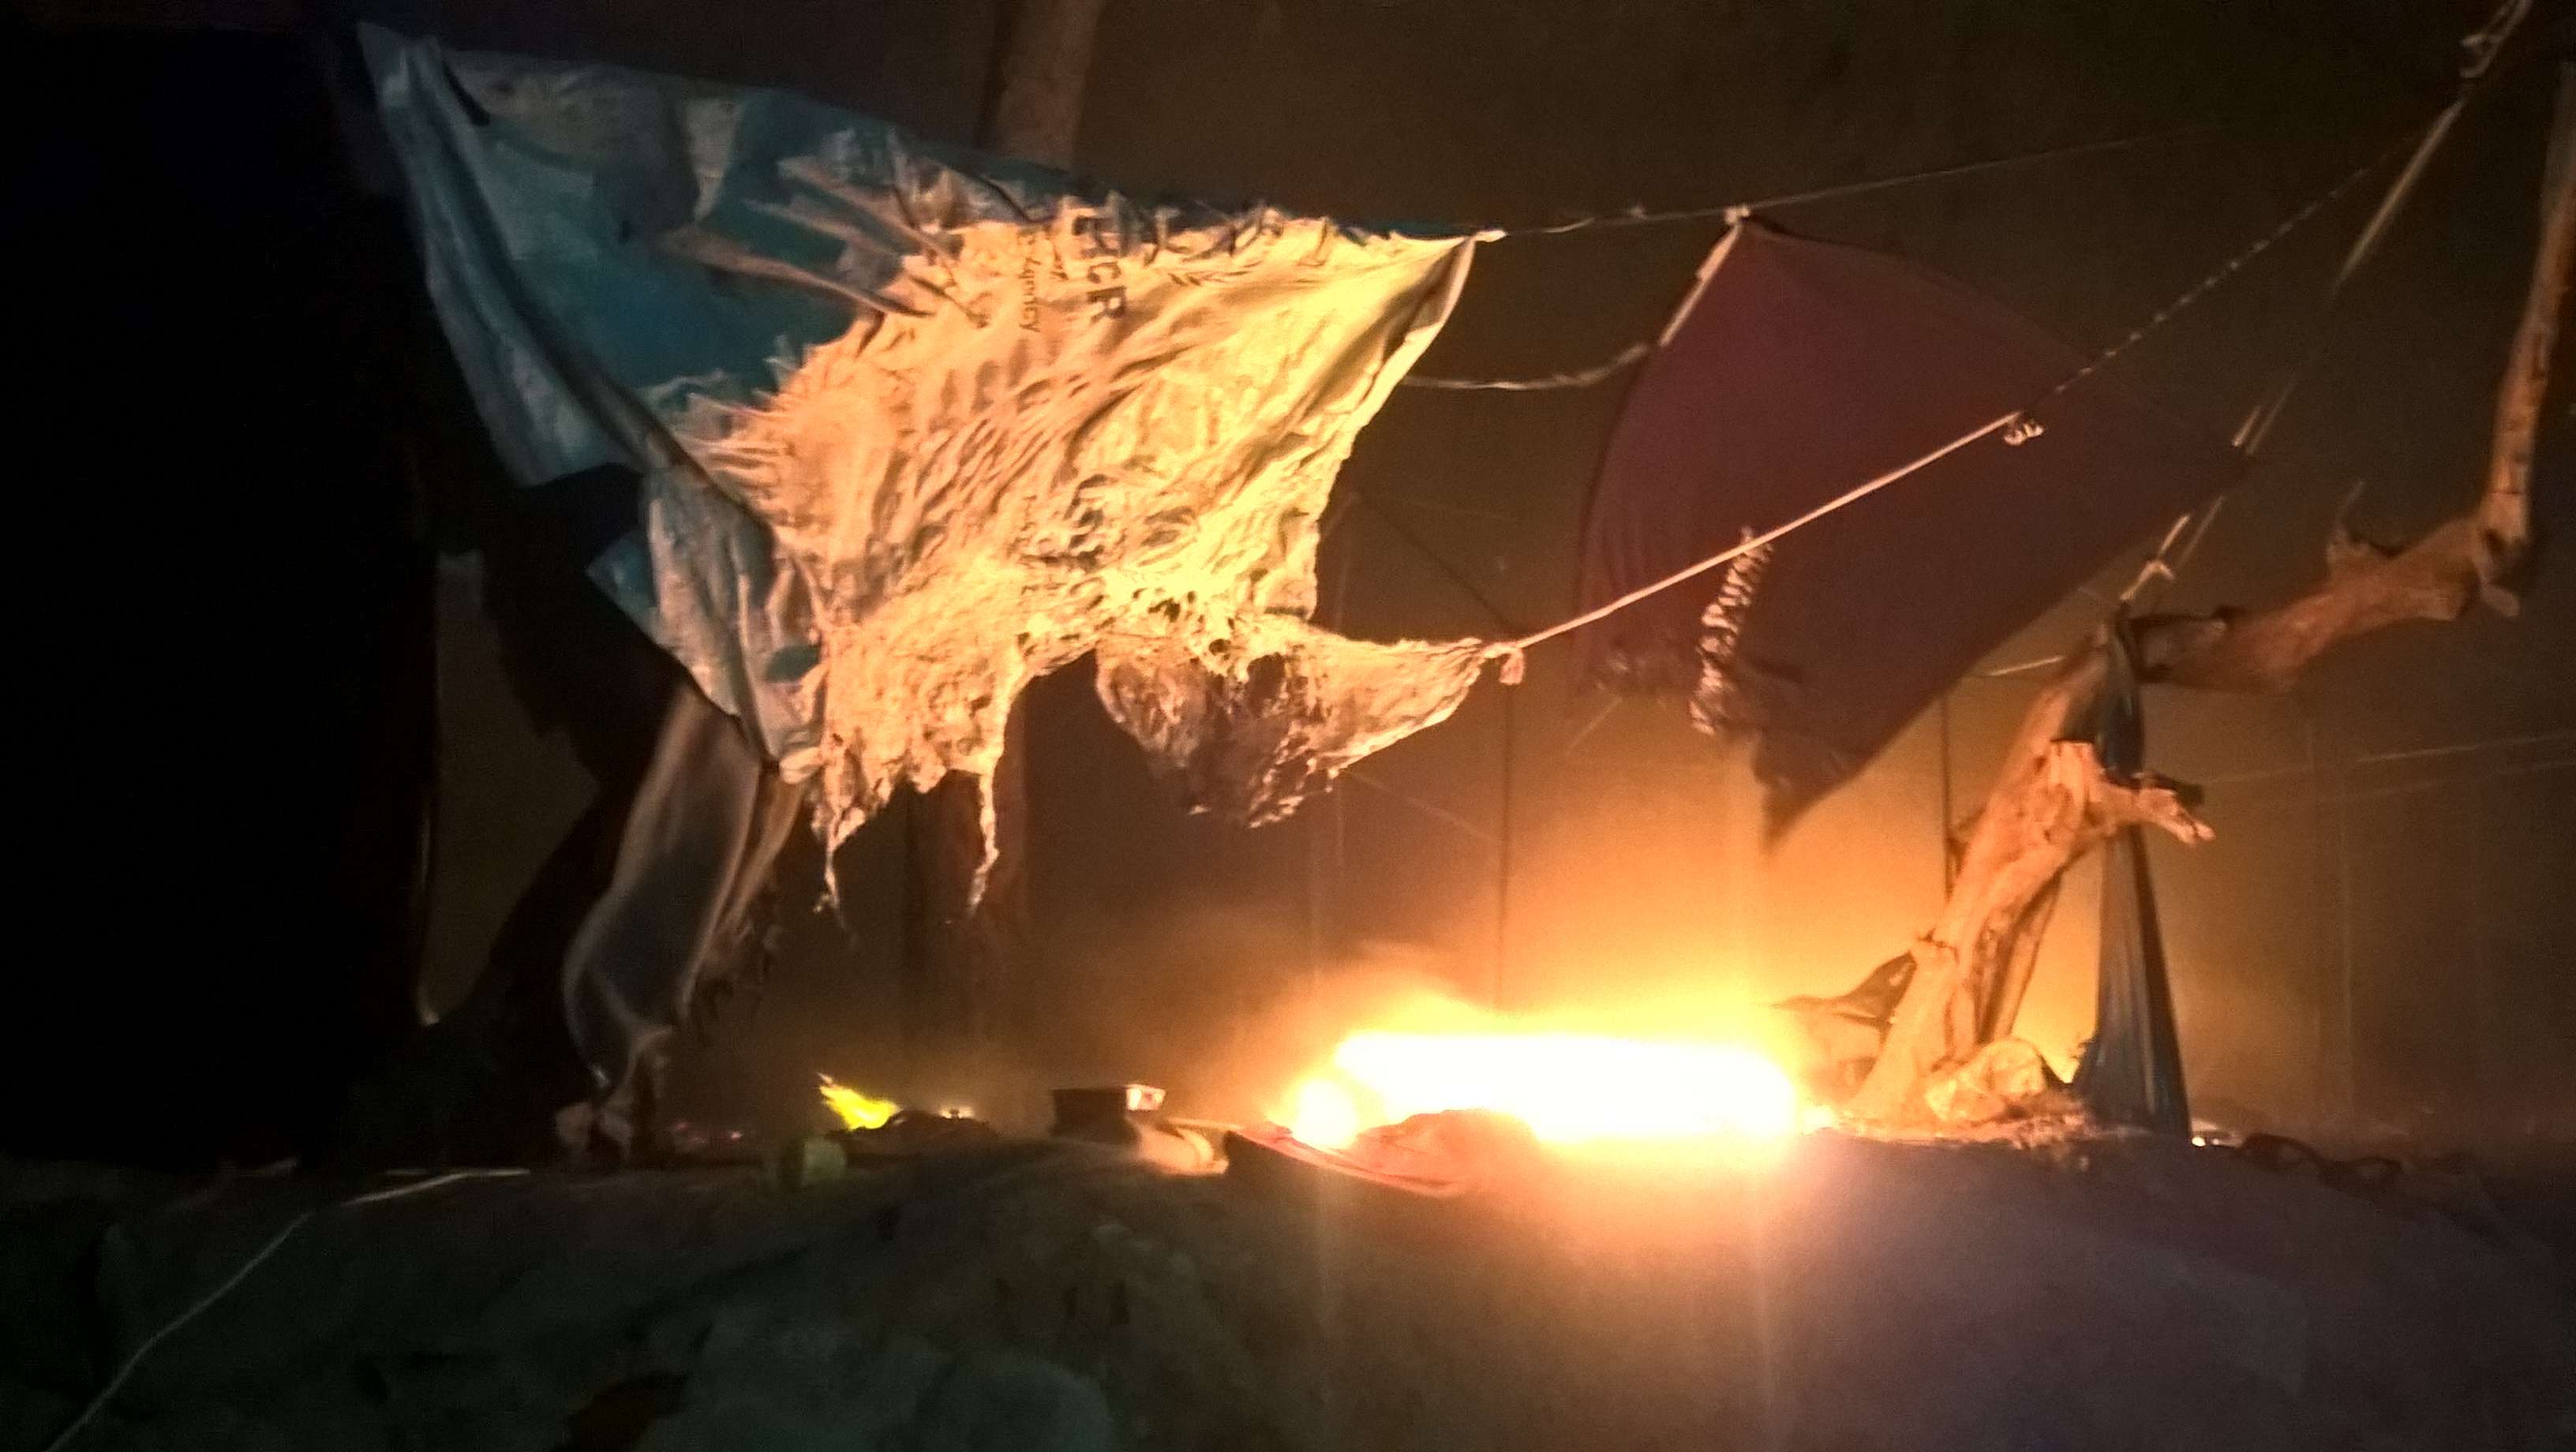 Lesvos, Greece: A rough night – Protests for freedom, Moria on fire and fascist attacks